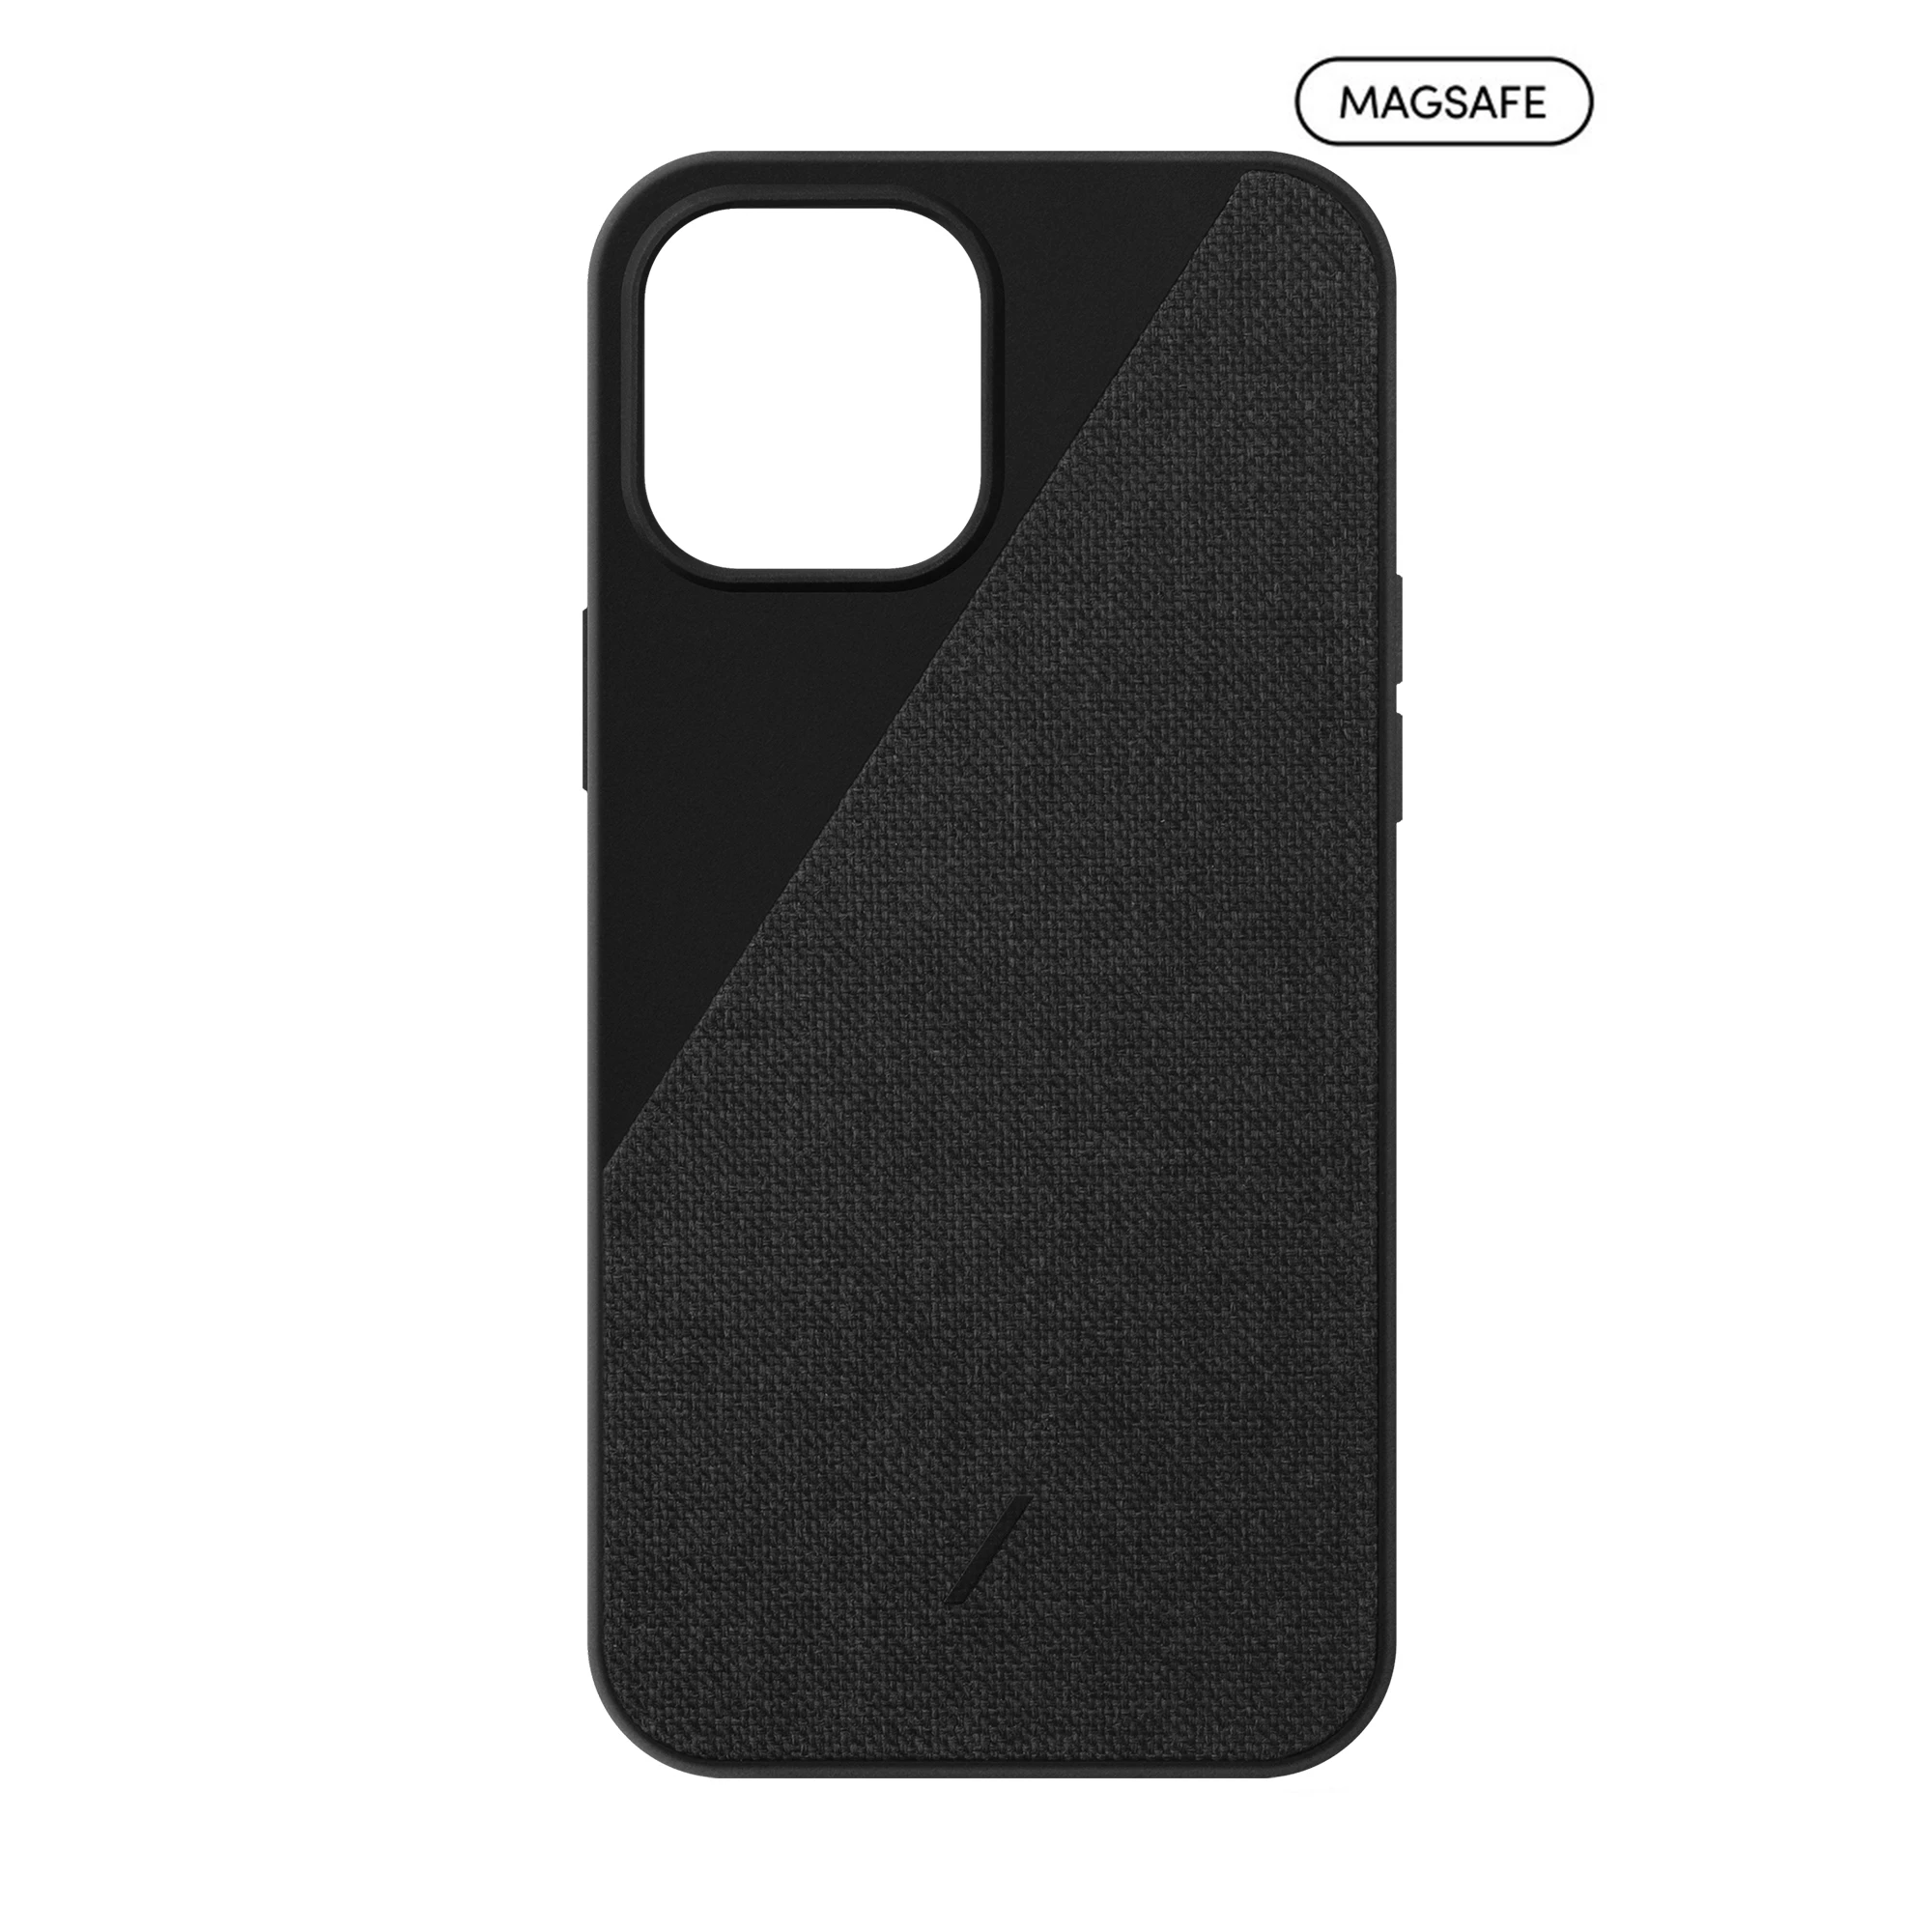 Native Union Clic Canvas Case with Magsafe for iPhone 12 Pro Max - Slate (CCAVM-BLK-NP20L)